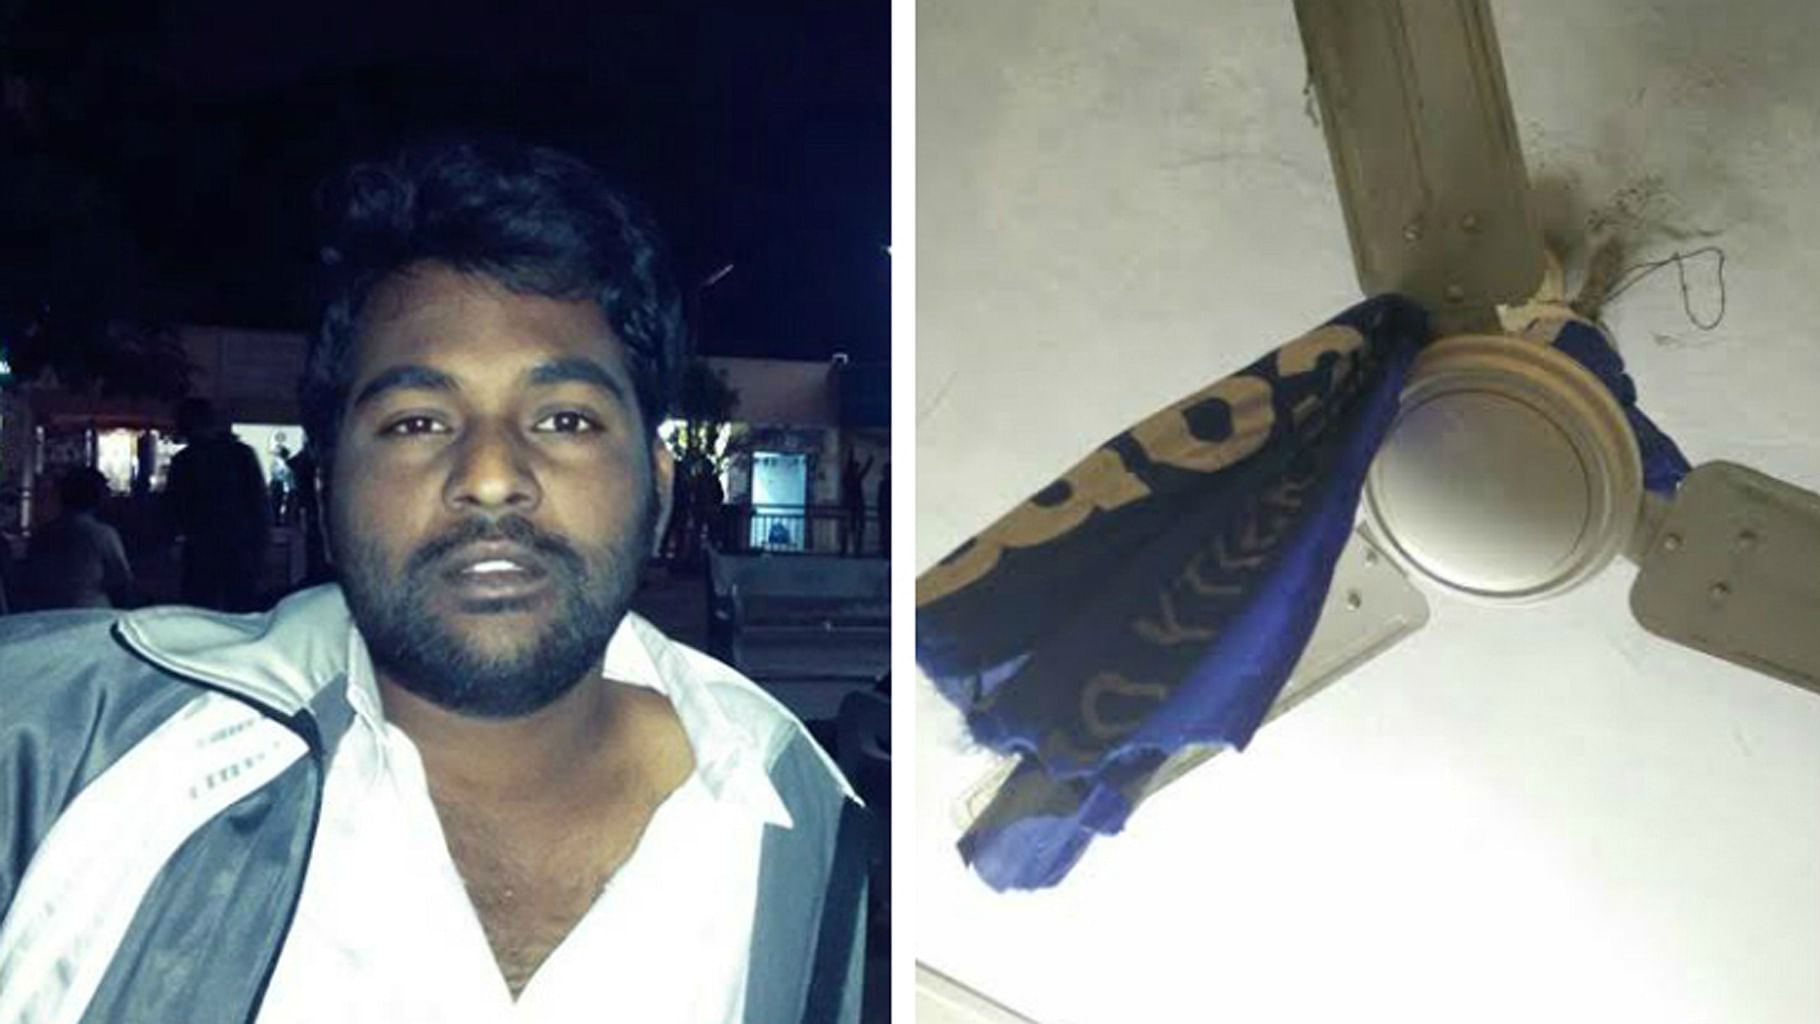 Rohit Vemula (left) and the place where he ended his life. (Photo: TNM)